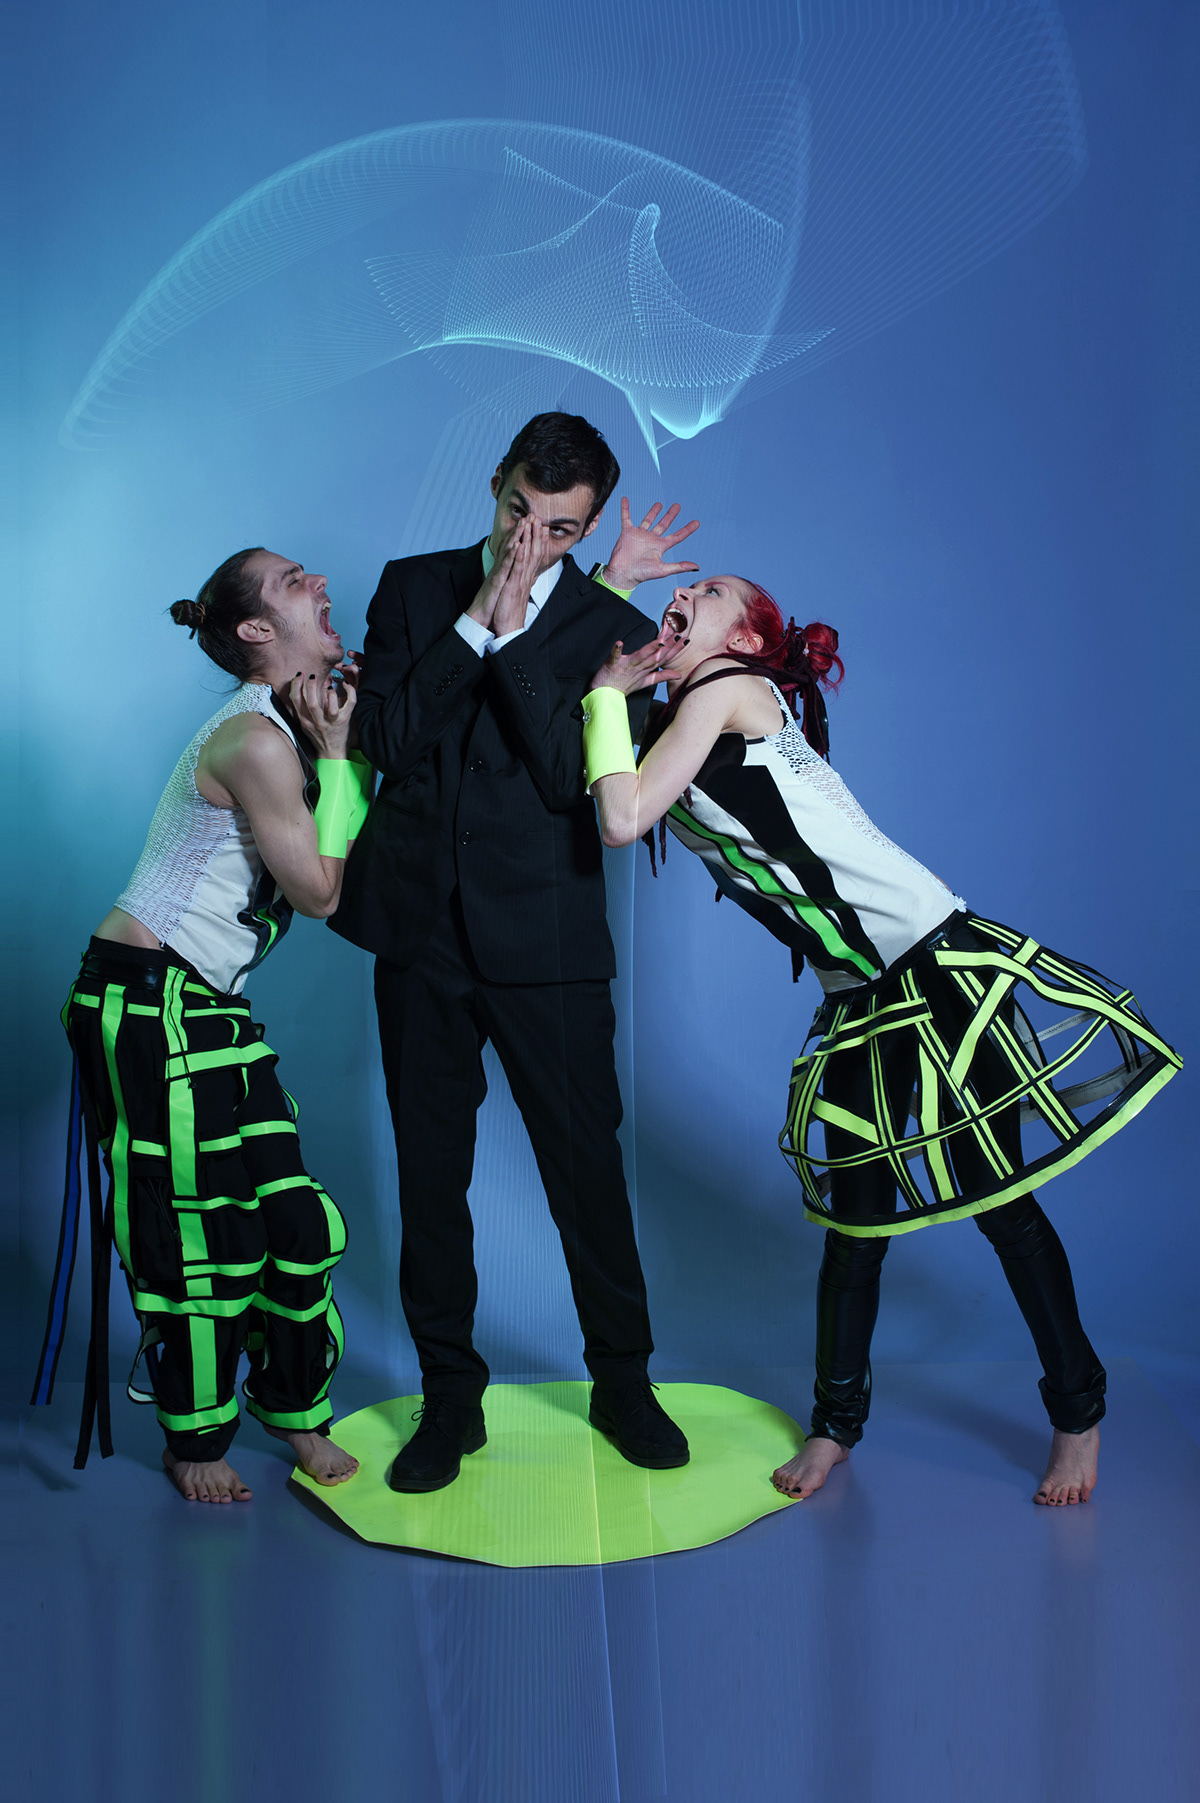 dancers' costumes Collaboration party sonic waves ultraviolet rays conceptual photo session